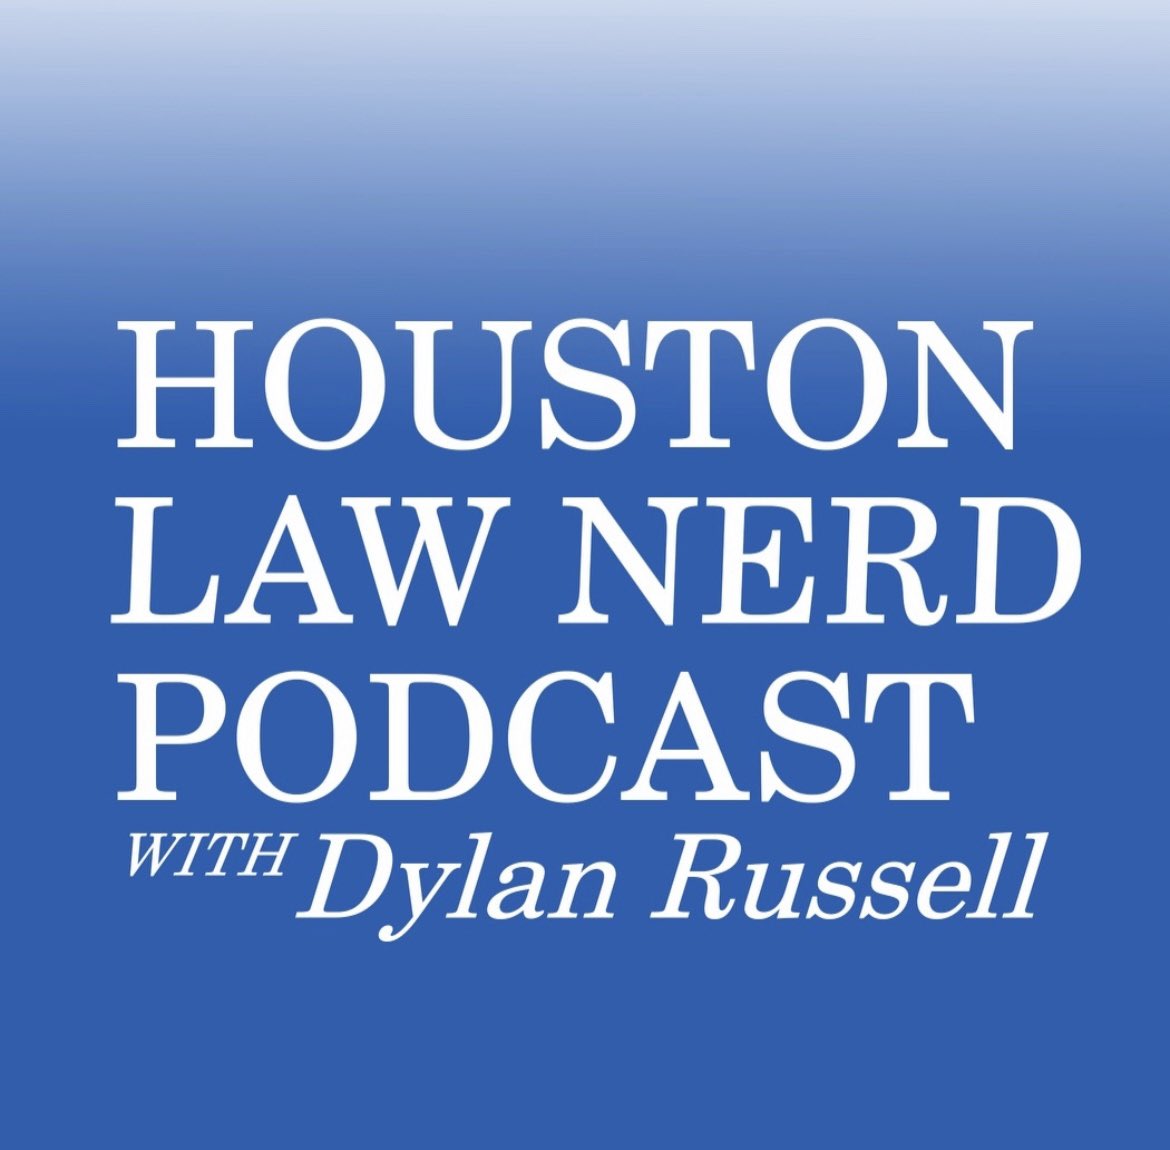 Episode #16 to be recorded next week! Can you guess who? #houstonlawnerd #lawtwitter #appellatetwitter